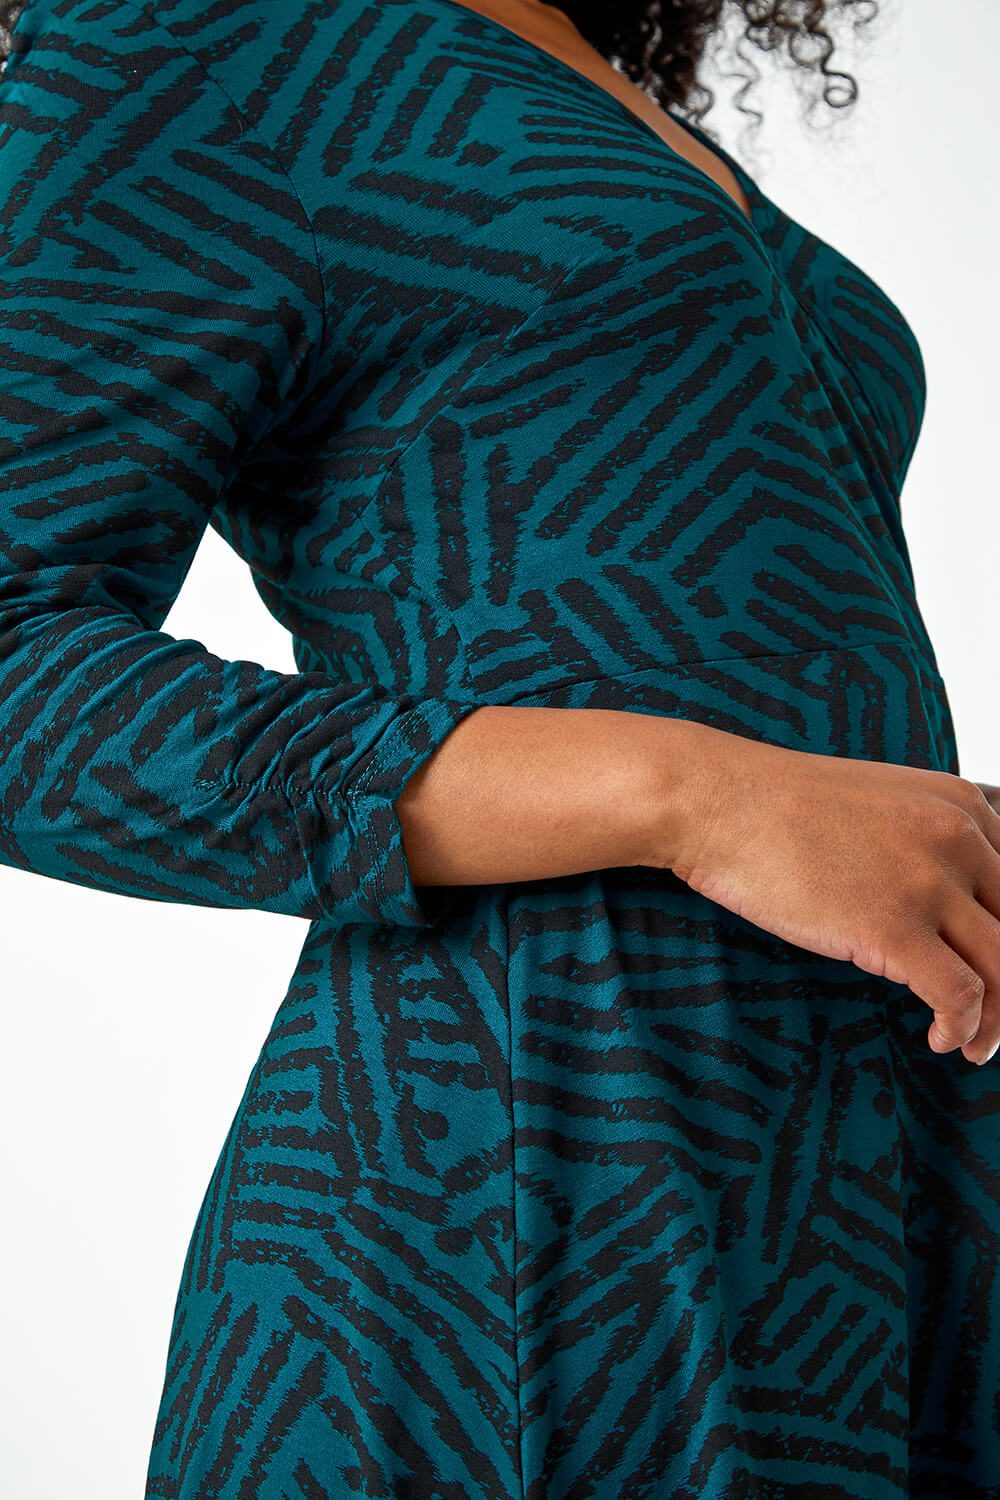 Teal Petite Mock Wrap Abstract Stretch Dress, Image 5 of 5